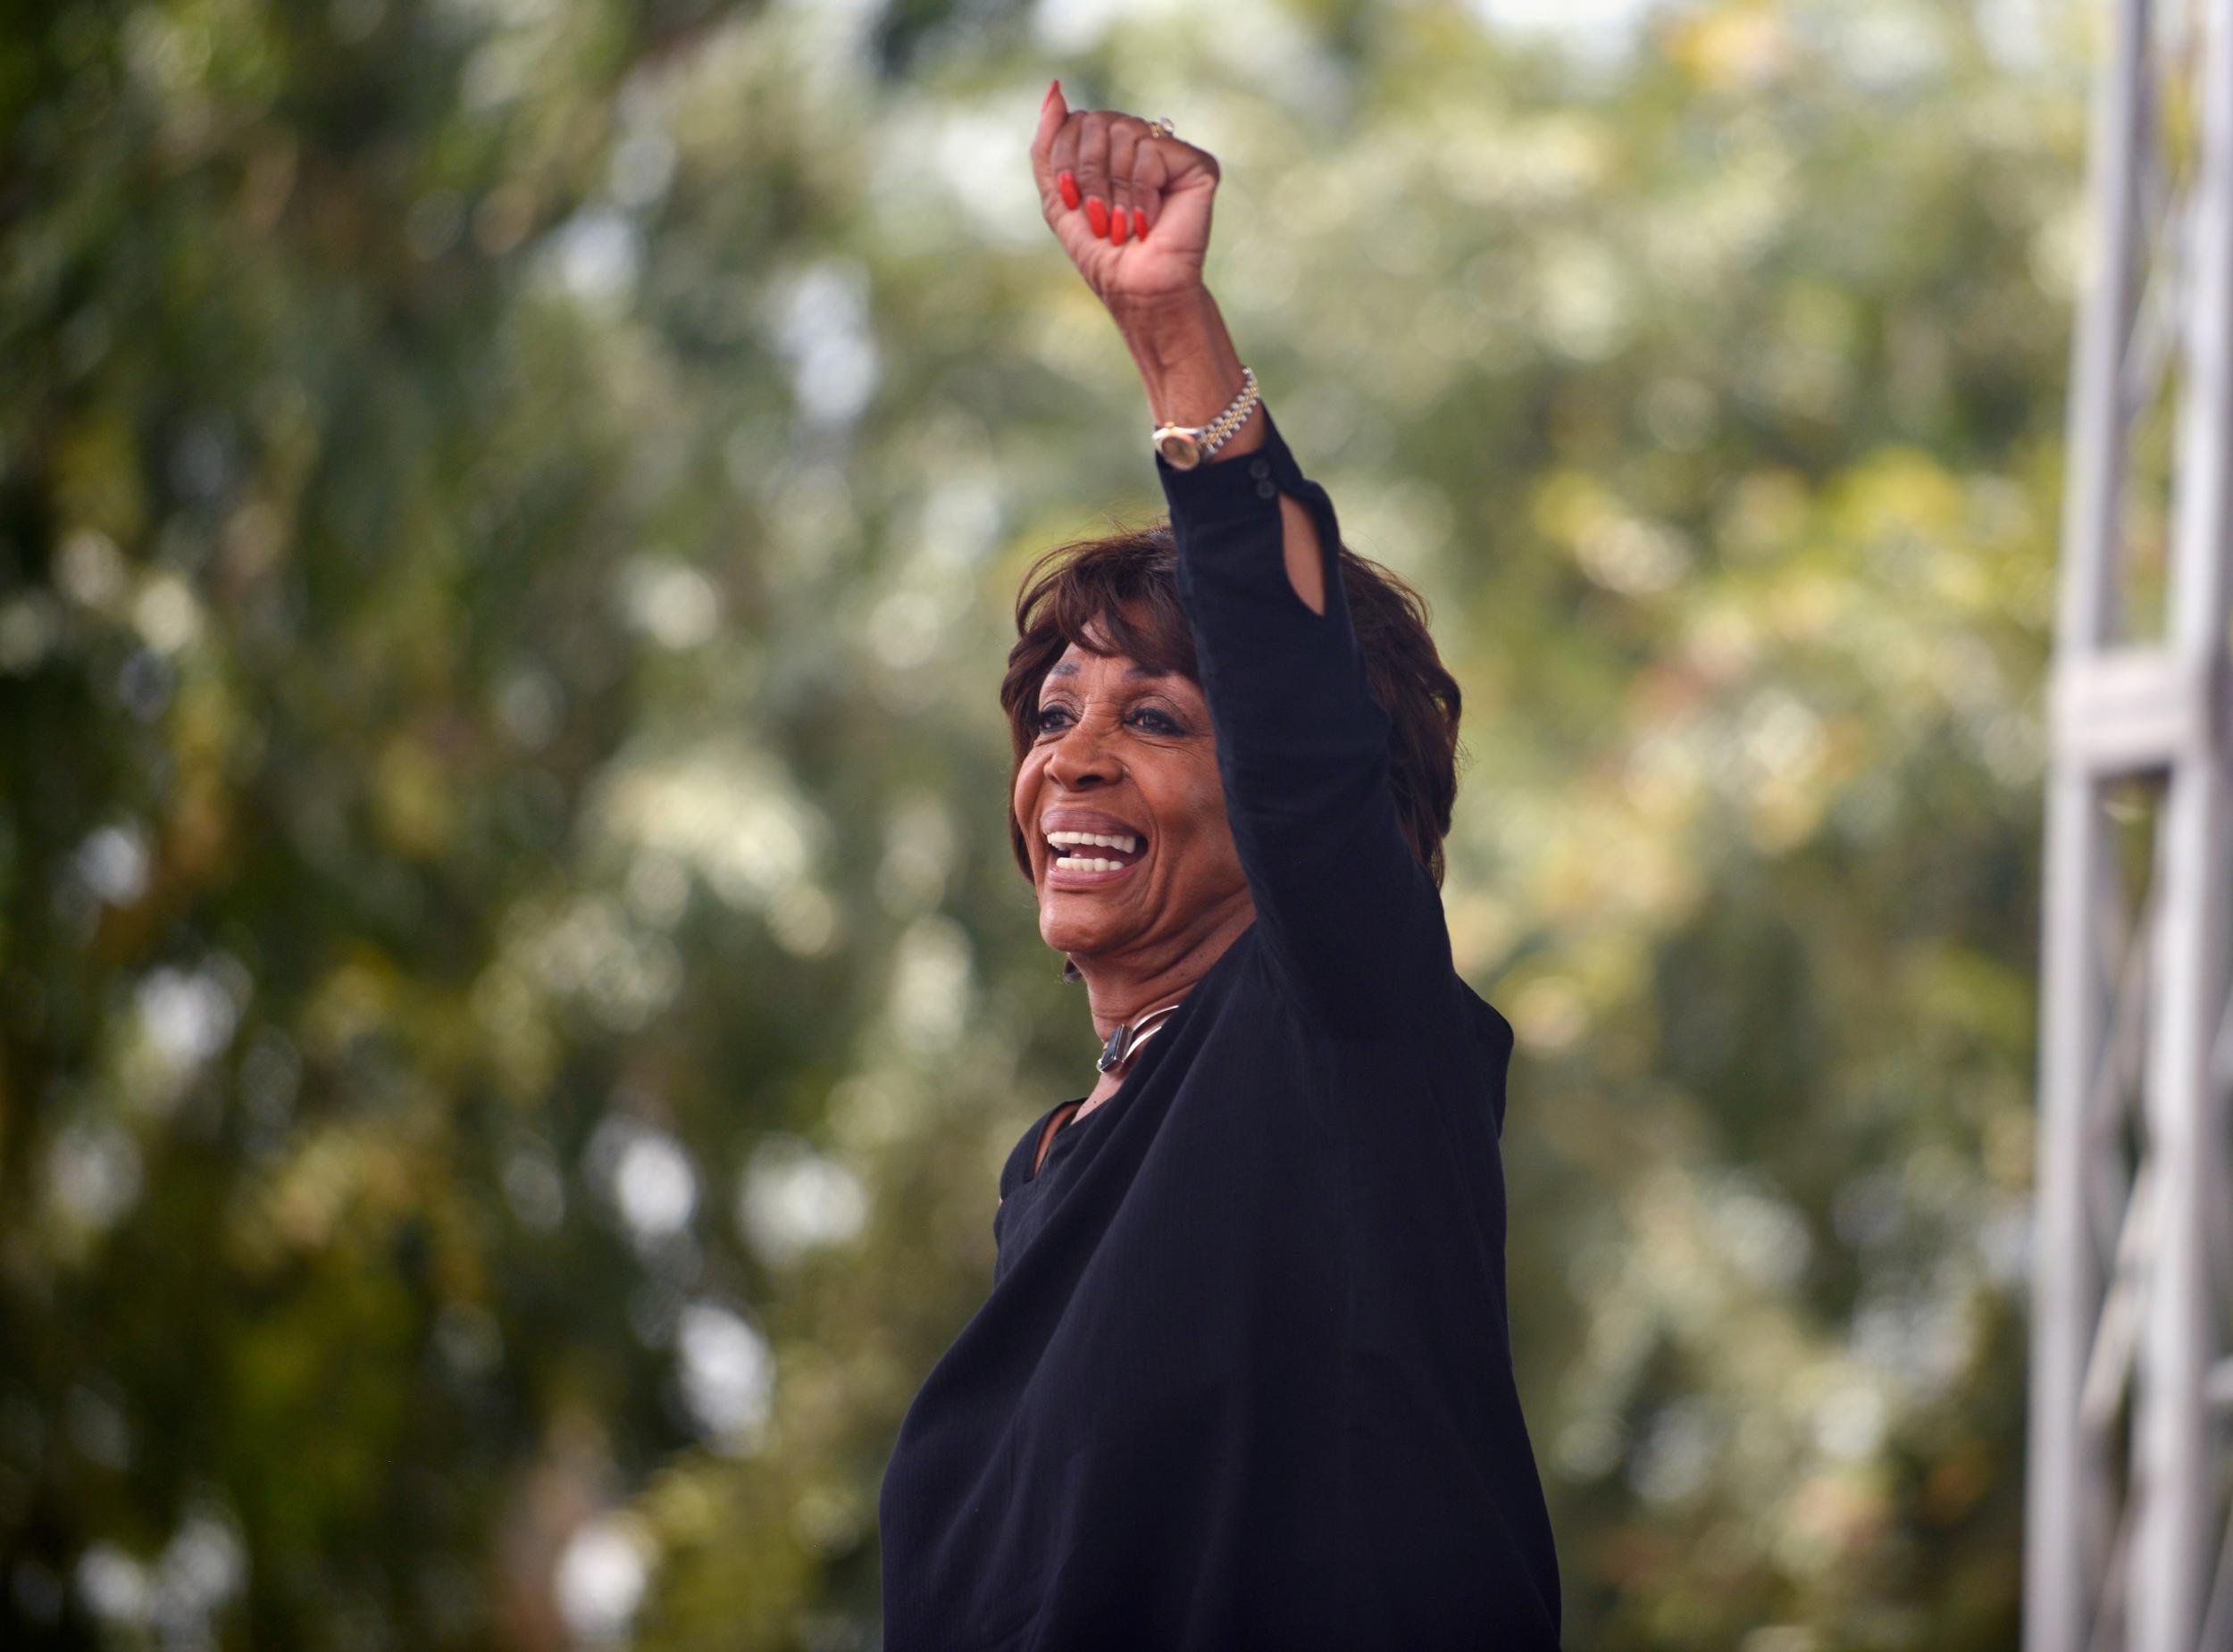 Waters has been critical of Mr Trump's treatment of disabled people